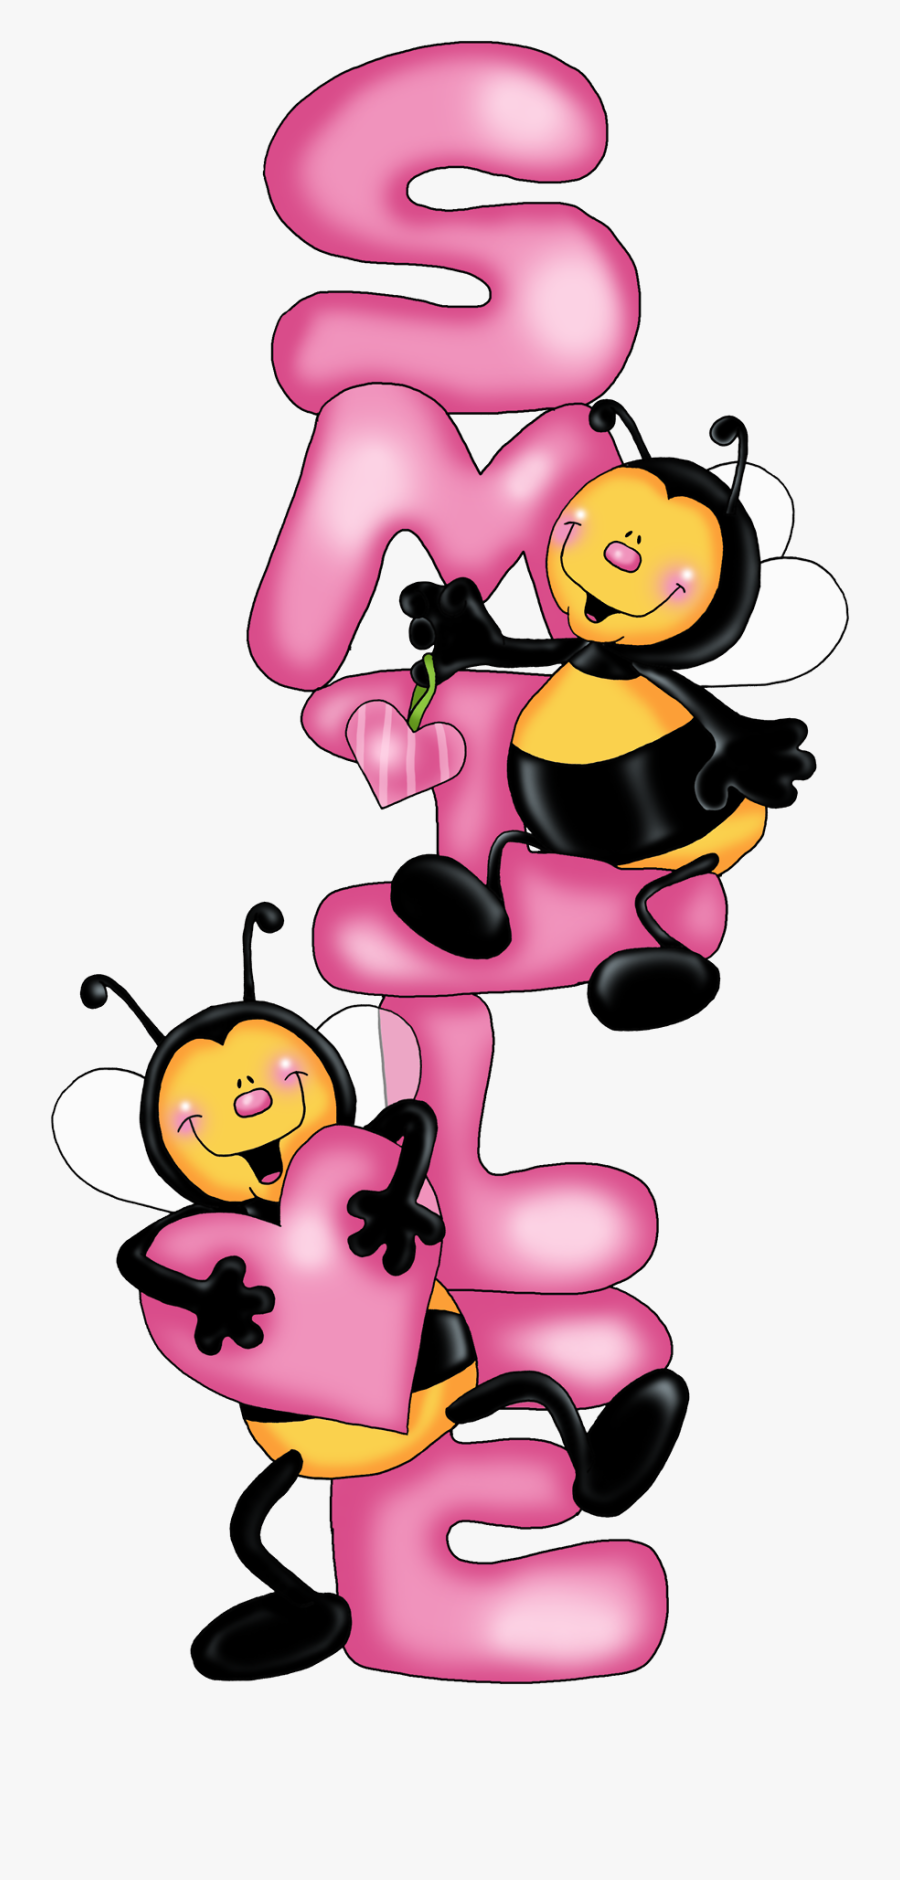 Good Morning Happy Friday Enjoy Your Weekend, Transparent Clipart